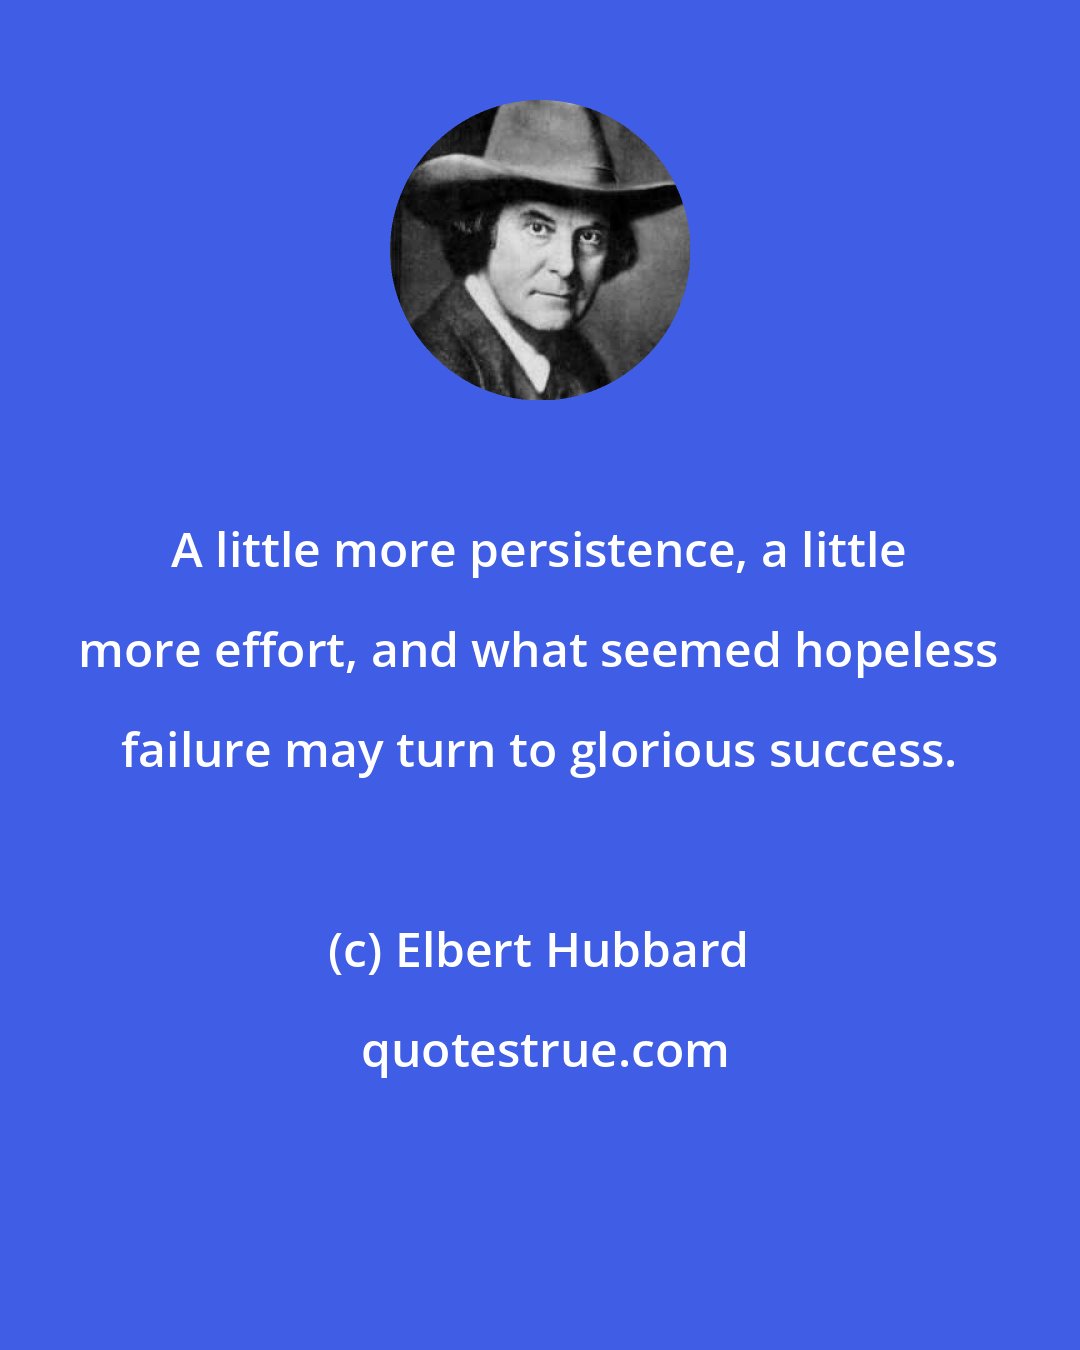 Elbert Hubbard: A little more persistence, a little more effort, and what seemed hopeless failure may turn to glorious success.